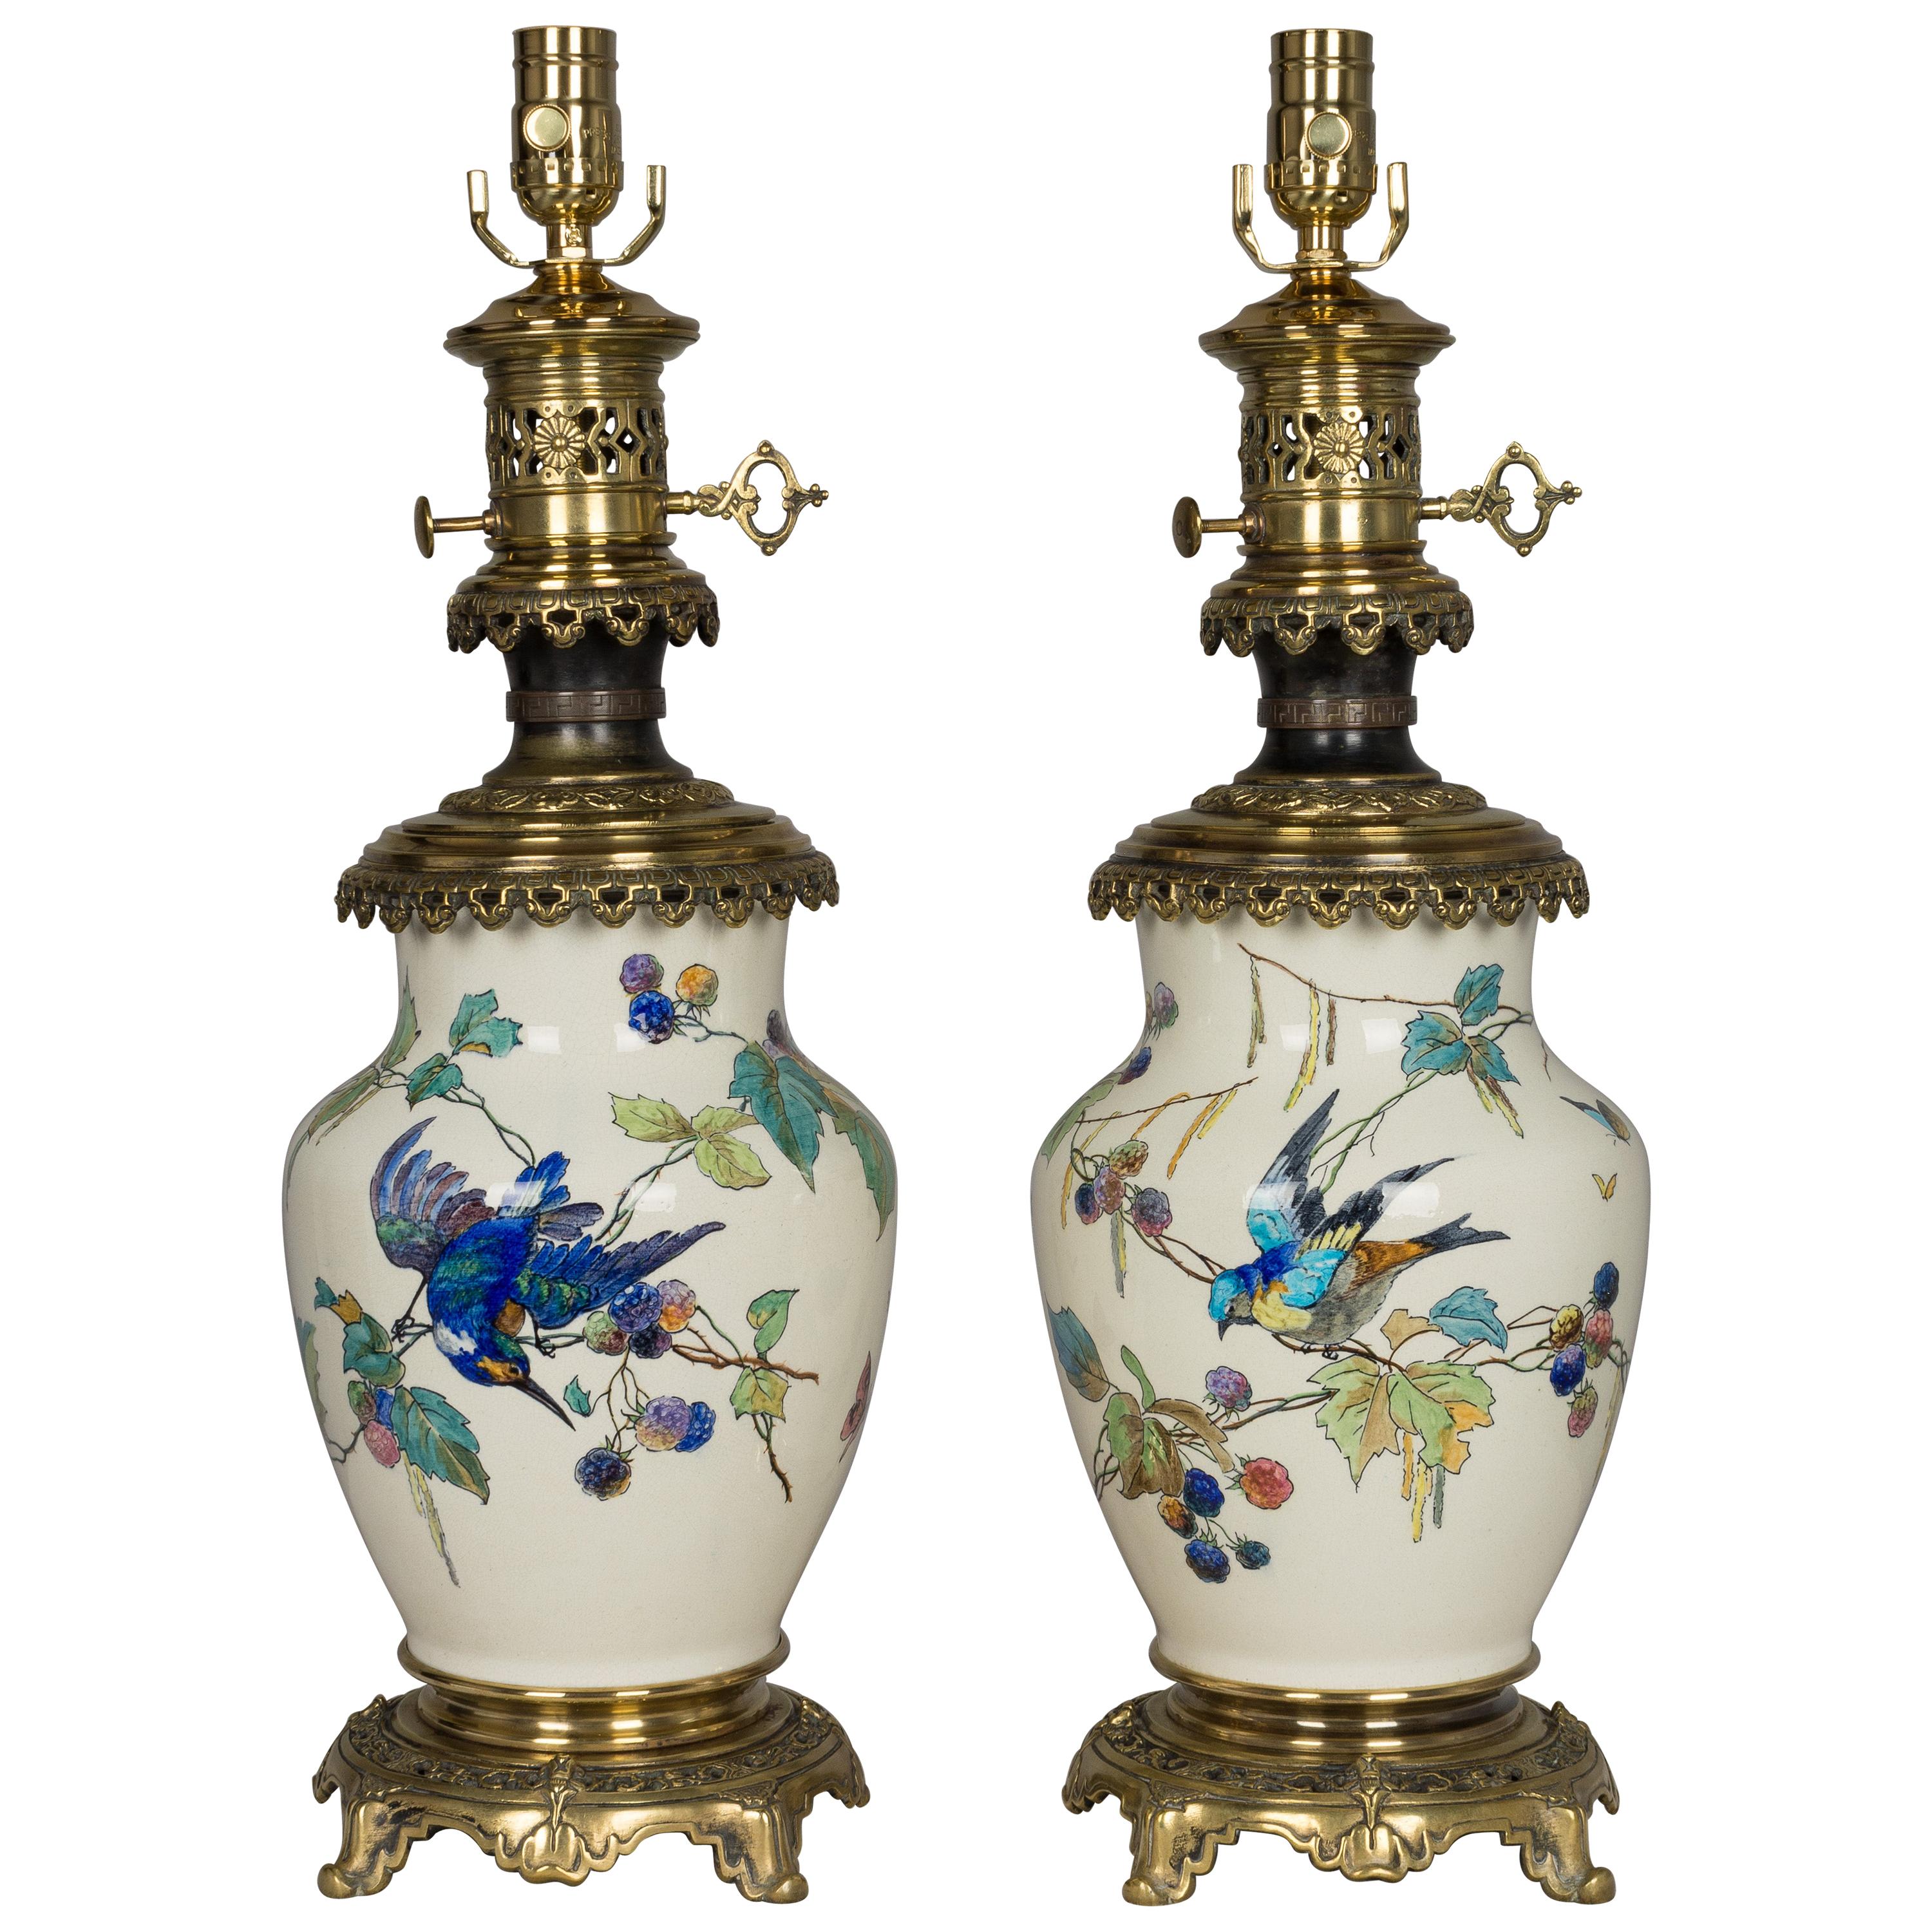 Pair of Bronze-Mounted Sevres Ceramic Lamps in the Manner of Theodore Deck